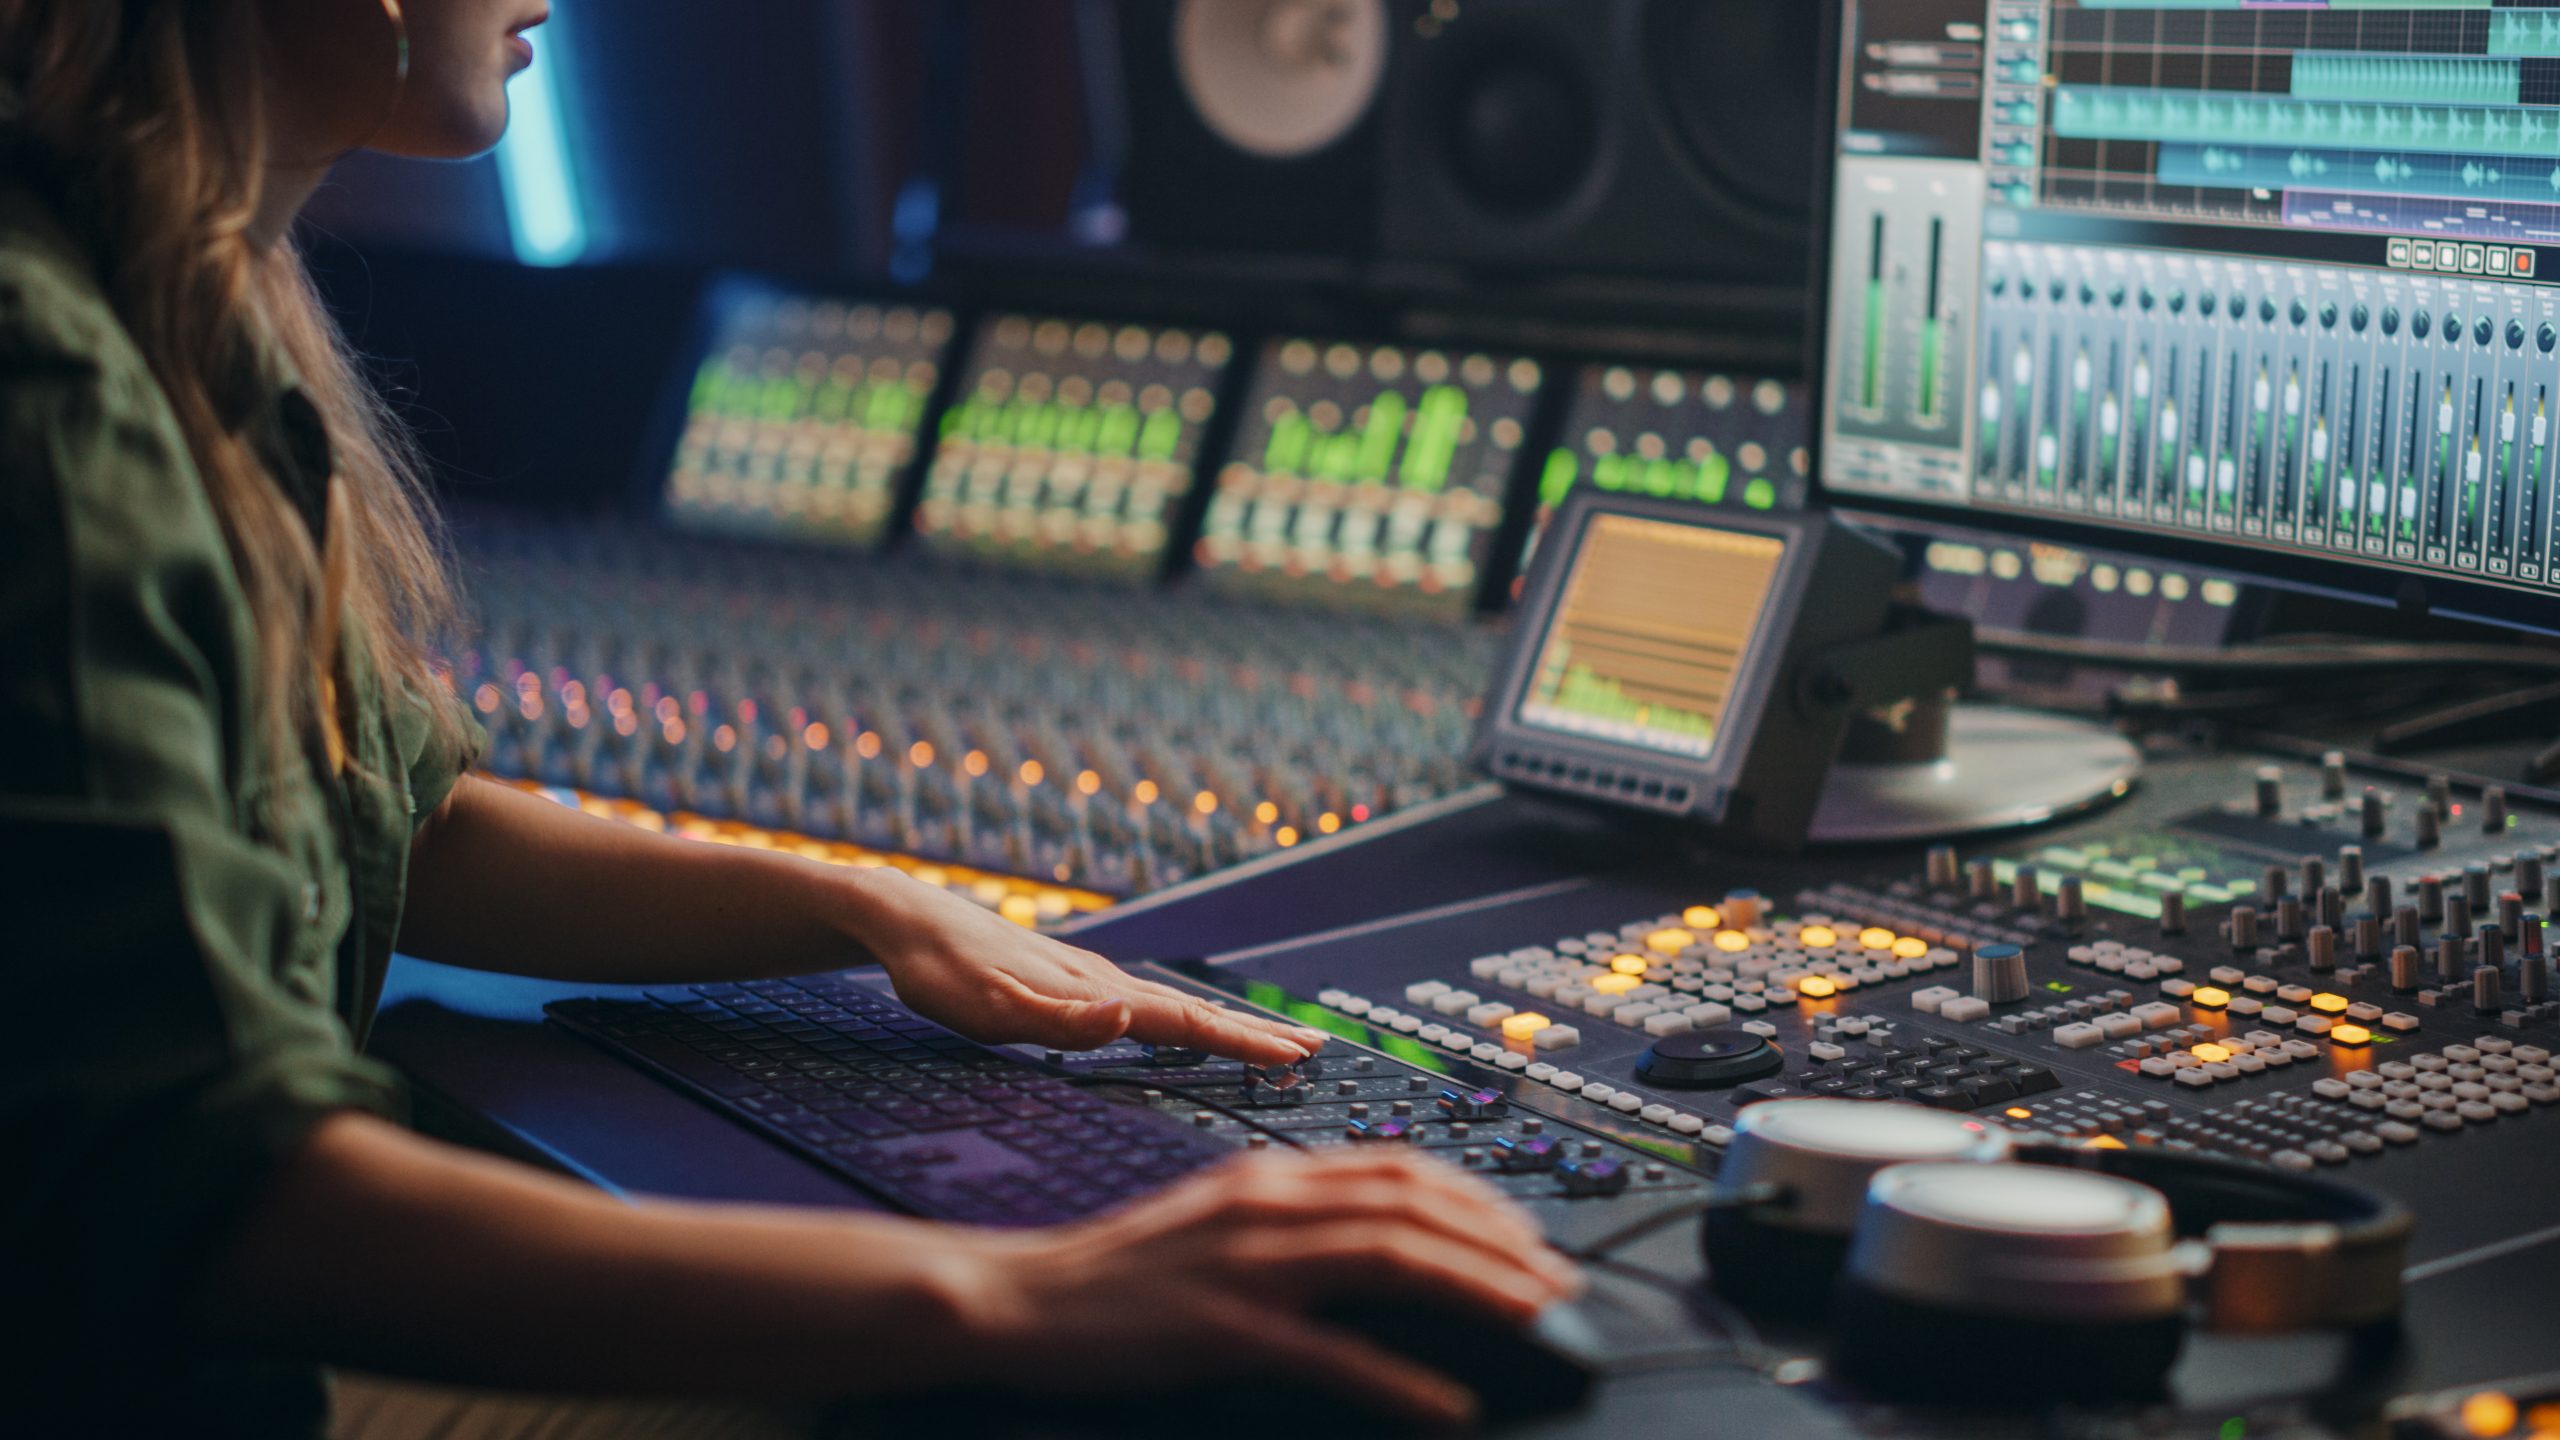 A sound engineer adjusts knobs and buttons on a large mixing console.